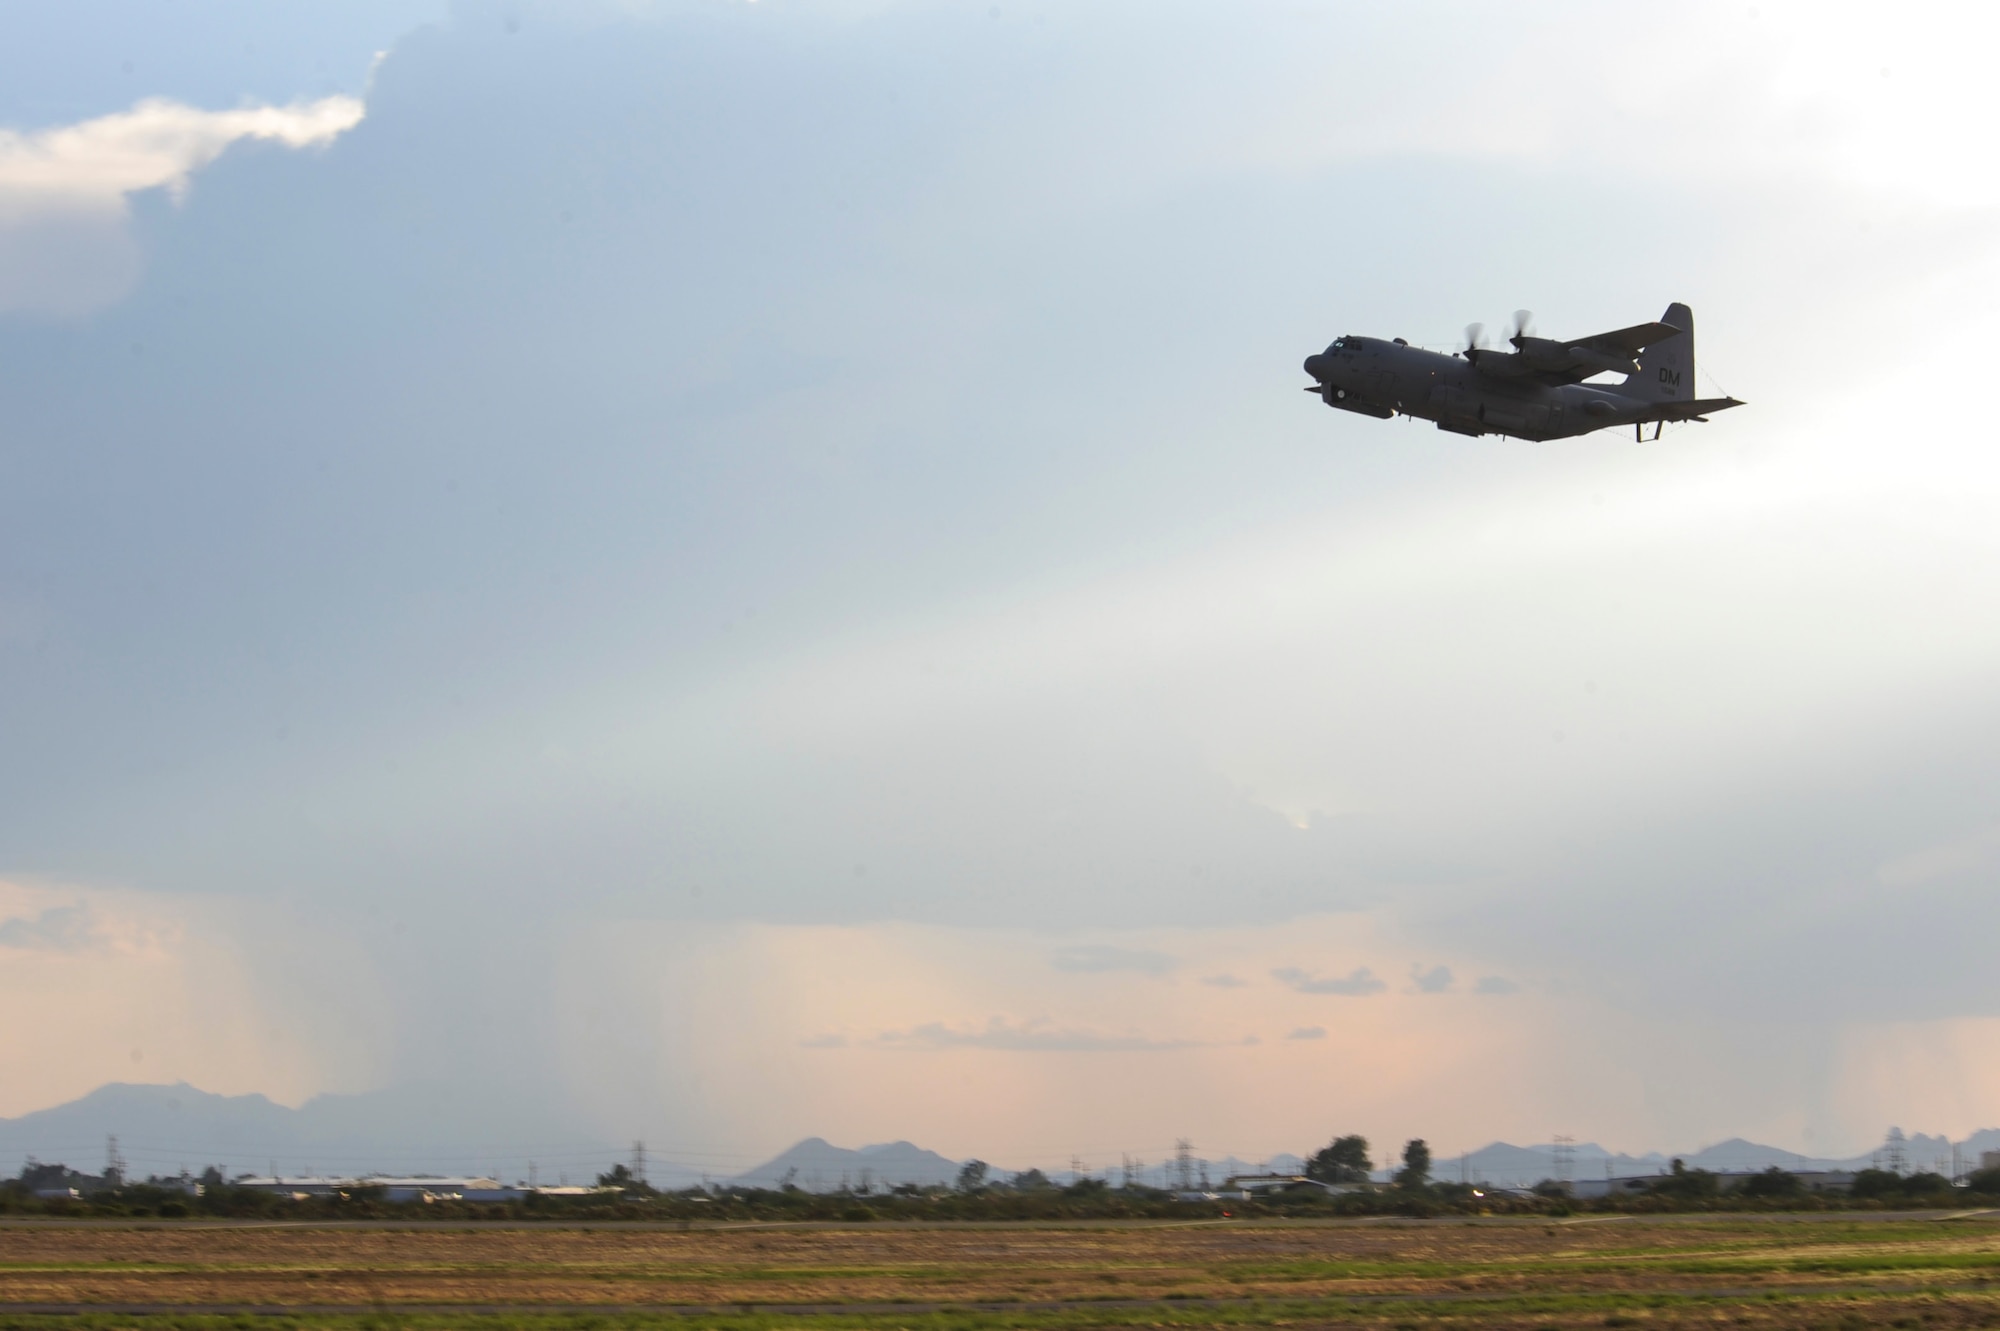 An EC-130H Compass Call from the 41st Electronic Combat Squadron flies over Davis-Monthan Air Force Base, Ariz., July 15, 2015. The 41st ECS provides war-fighting commanders with combat ready EC-130H Compass Call aircraft and aircrews trained to execute electronic attack and information warfare strategy. (U.S. Air Force photo by Airman 1st Class Cheyenne Morigeau/Released)